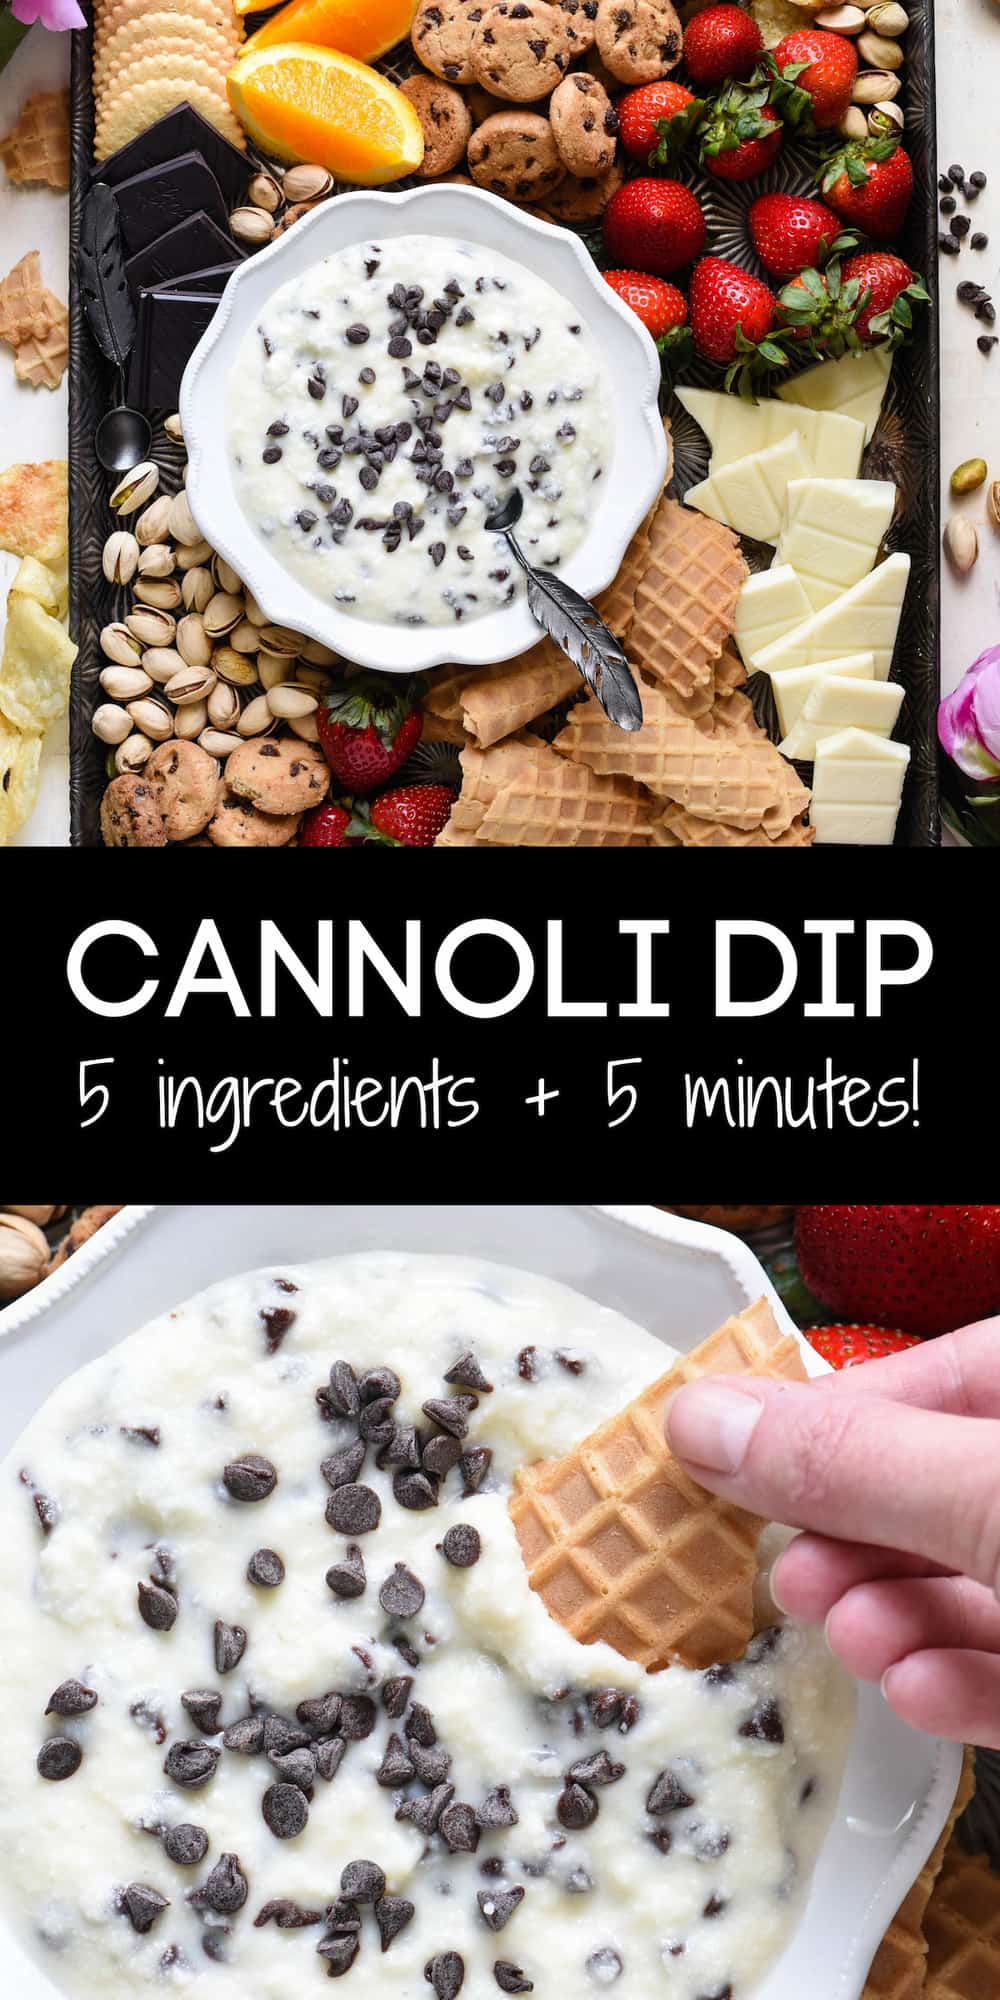 Collage of creamy dessert dip images with overlay: CANNOLI DIP 5 ingredients + 5 minutes!